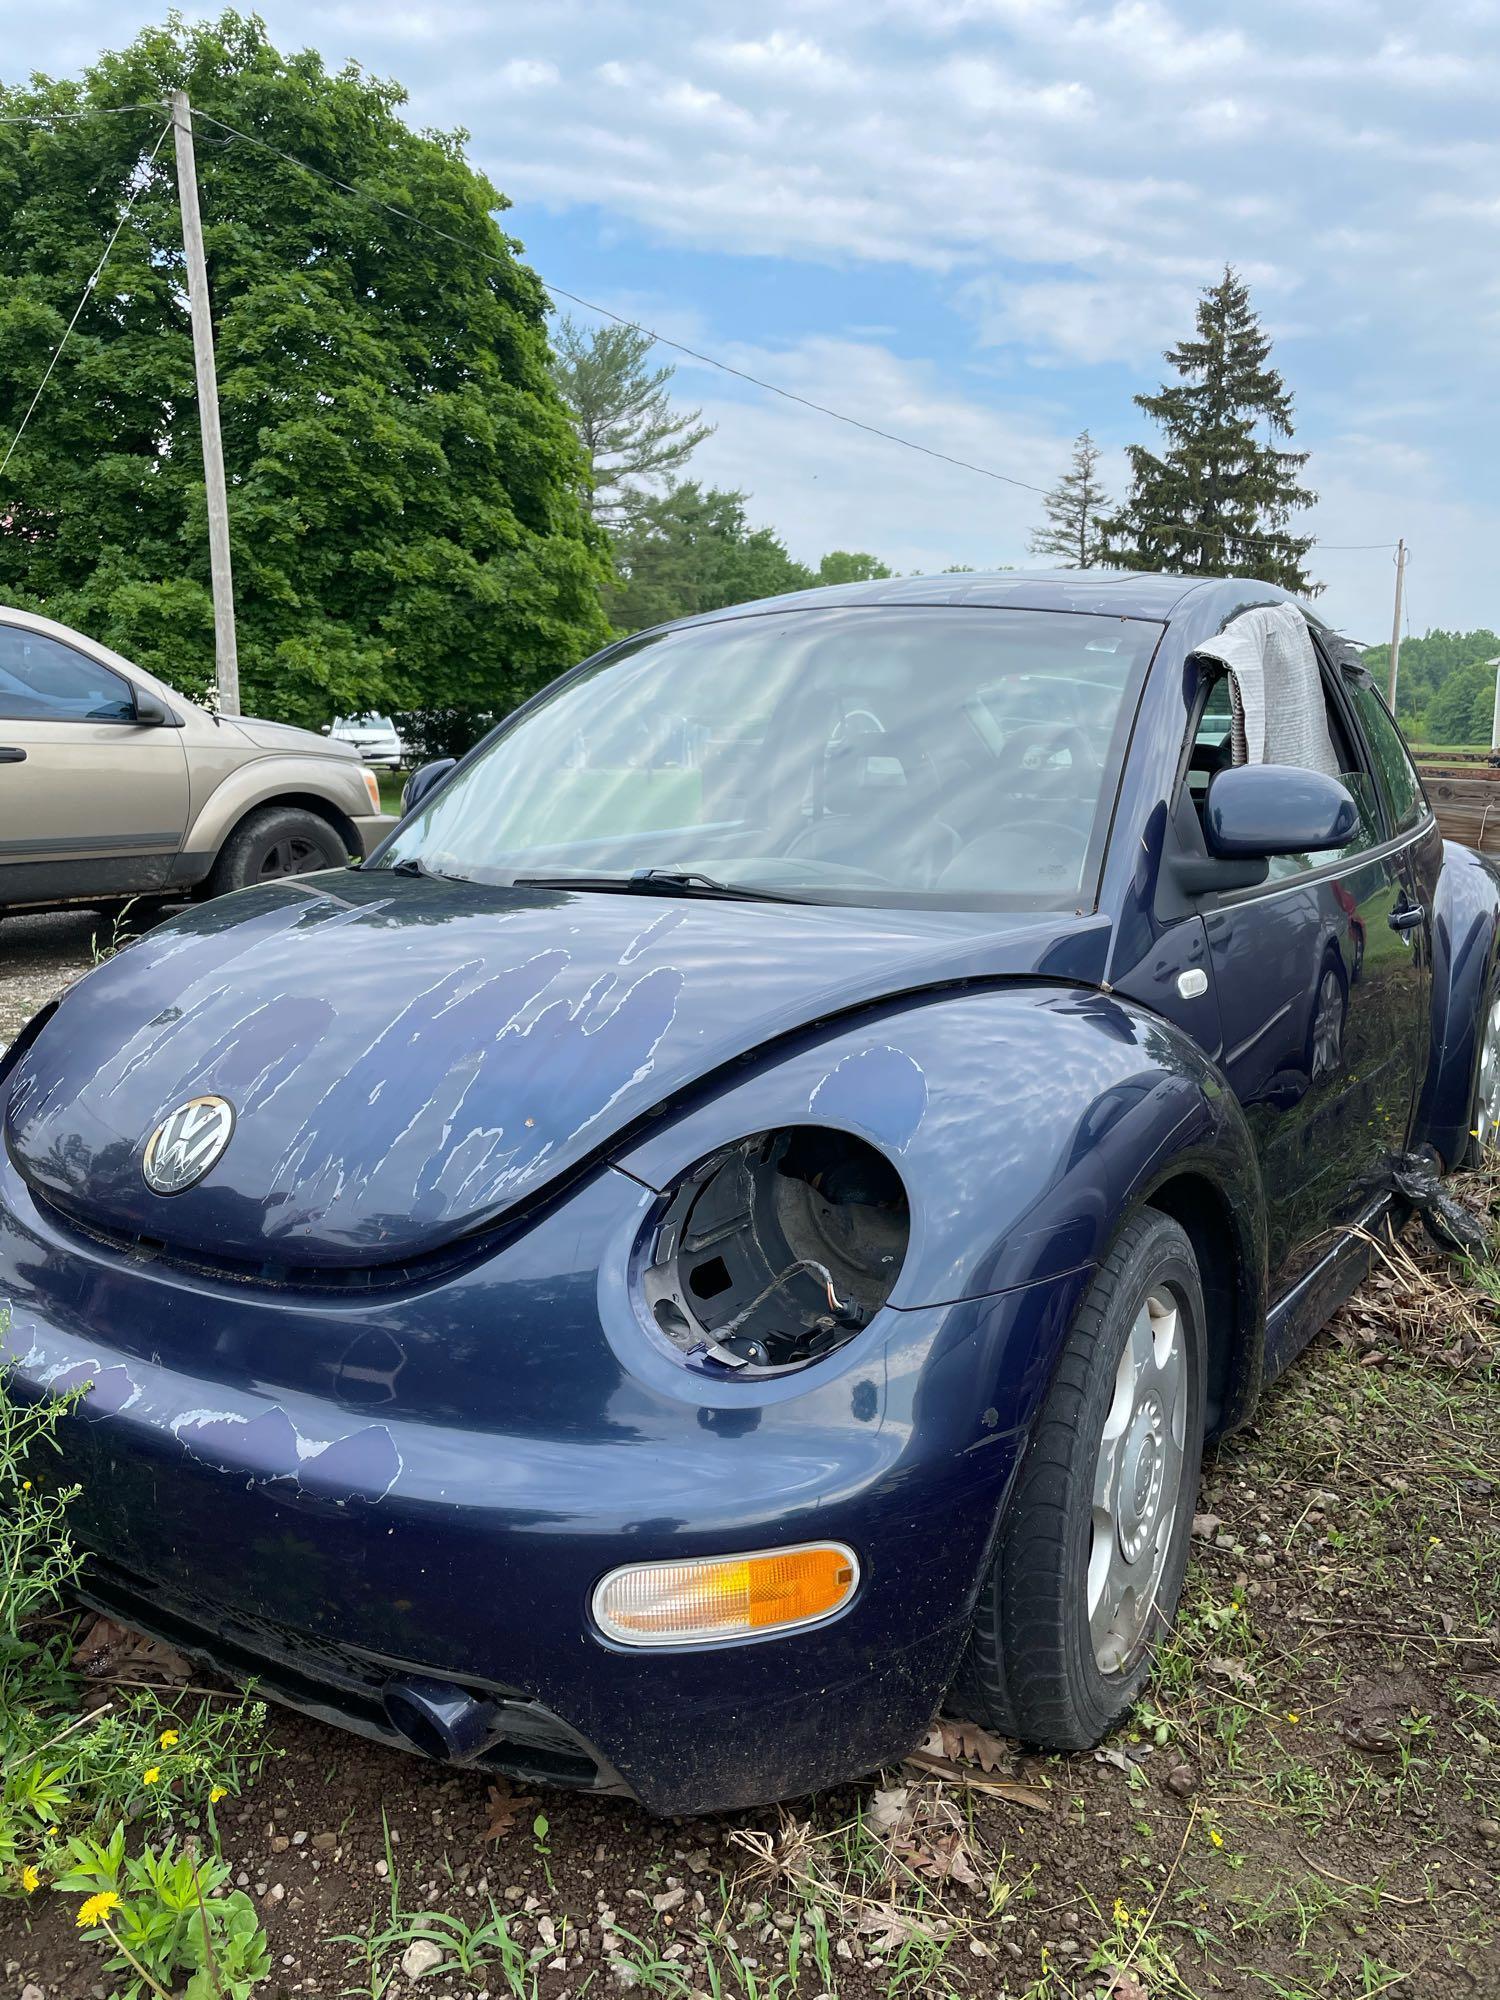 2000 Volkswagen New Beetle for Parts, Good Engine/Transmission, Miles Unknown